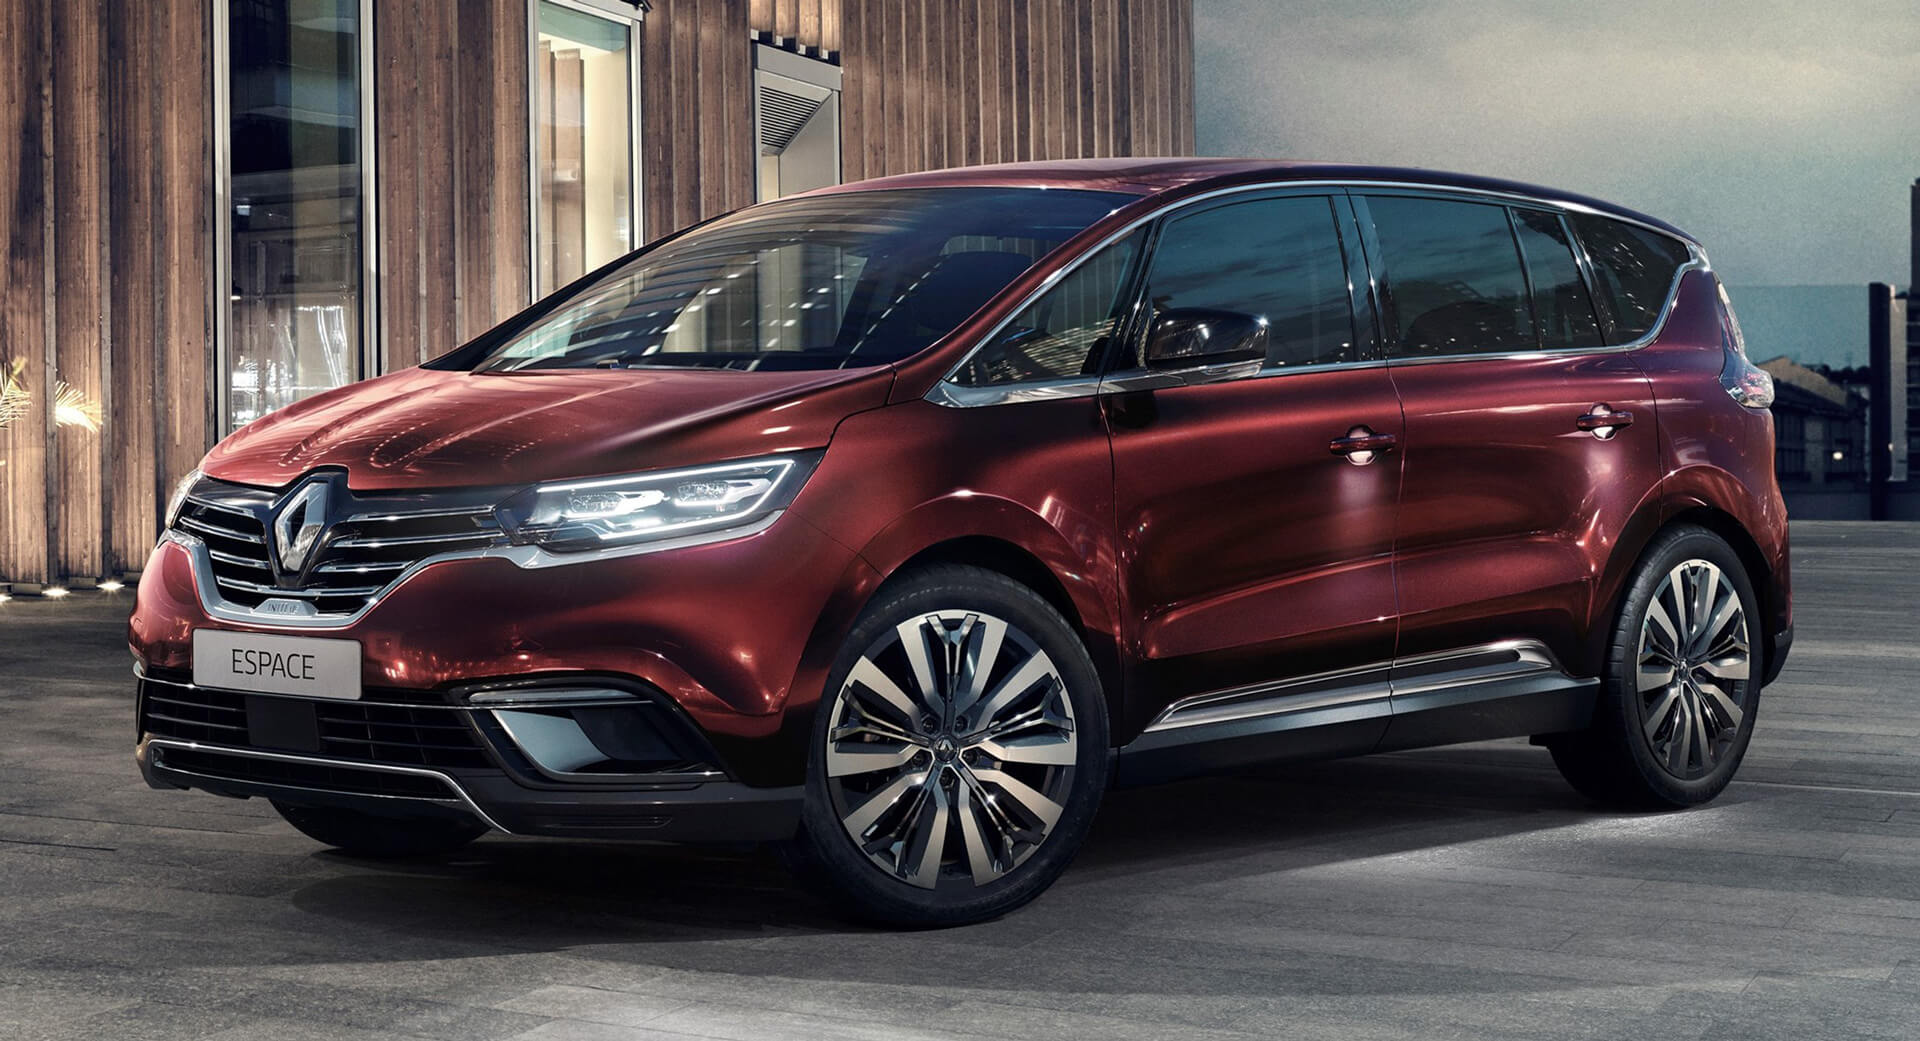 The All-new Renault Espace: same DNA, new generation - Site media